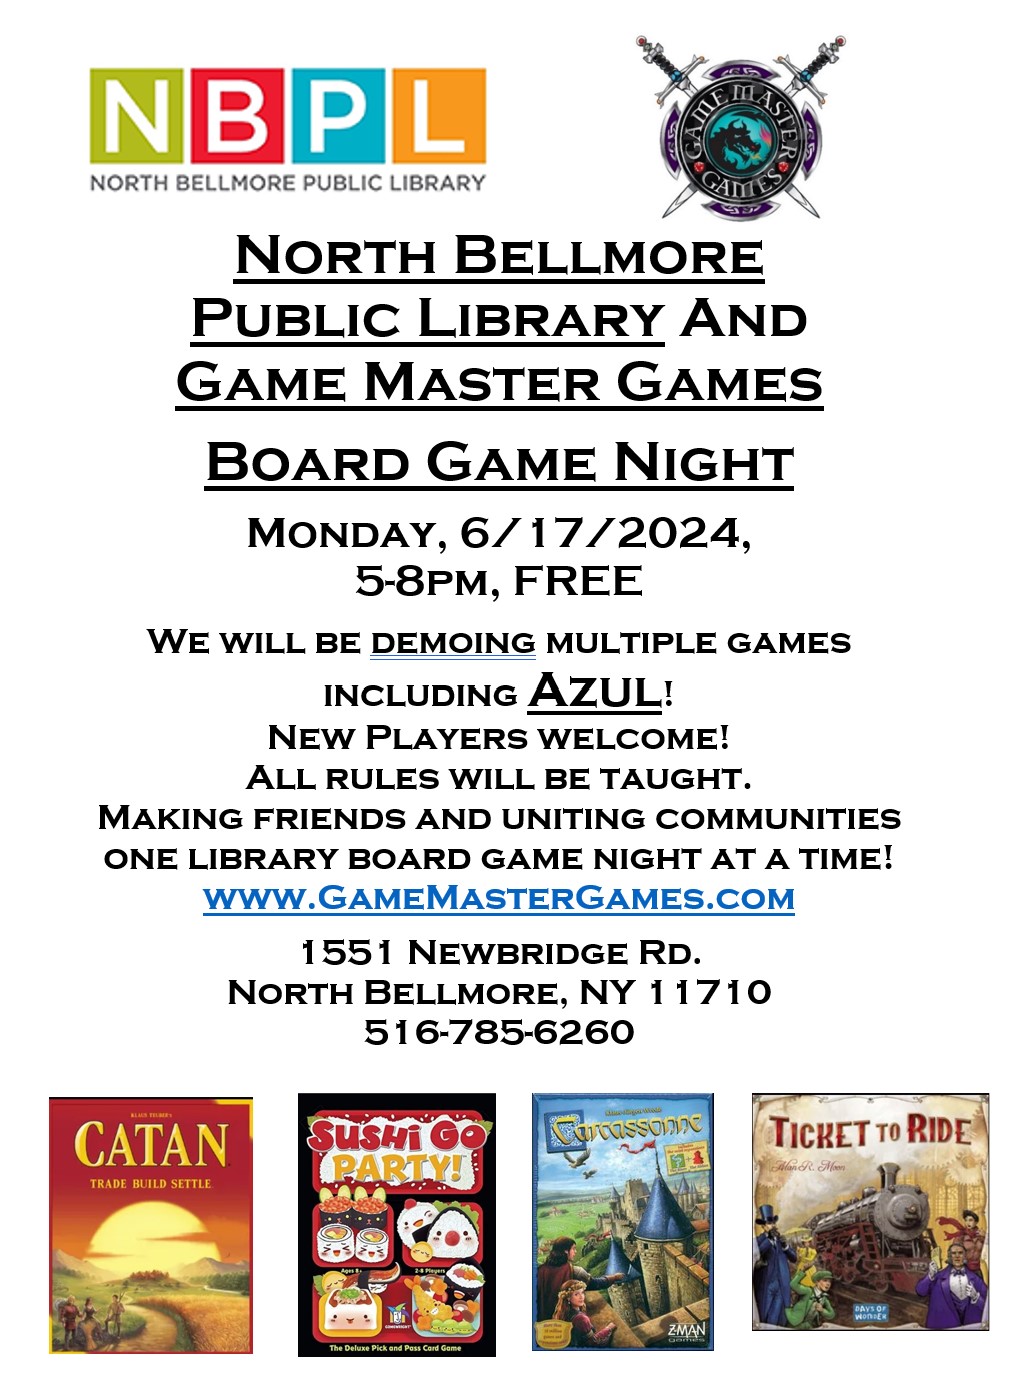 Board Game Night at the North Bellmore Library! Have fun and make some new friends!